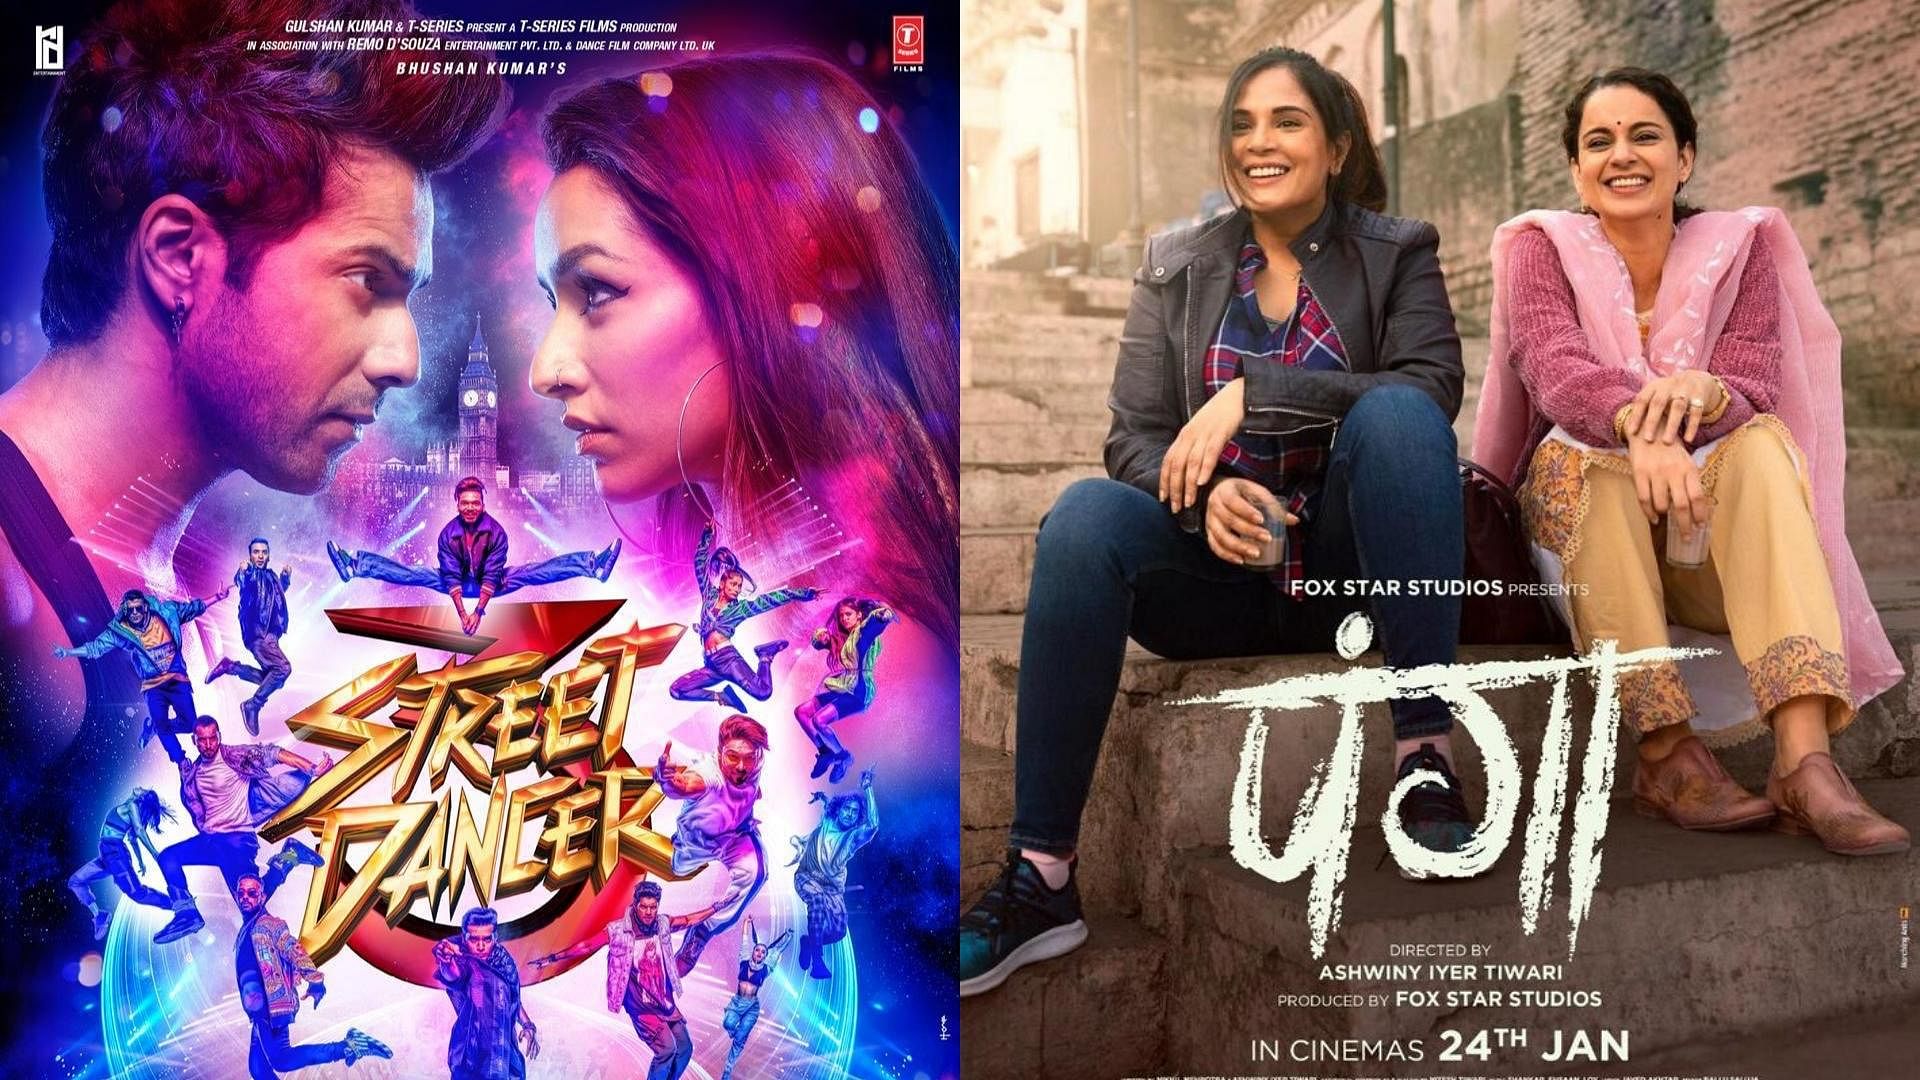 Street Dancer 3D and Panga release in theatres on&nbsp;